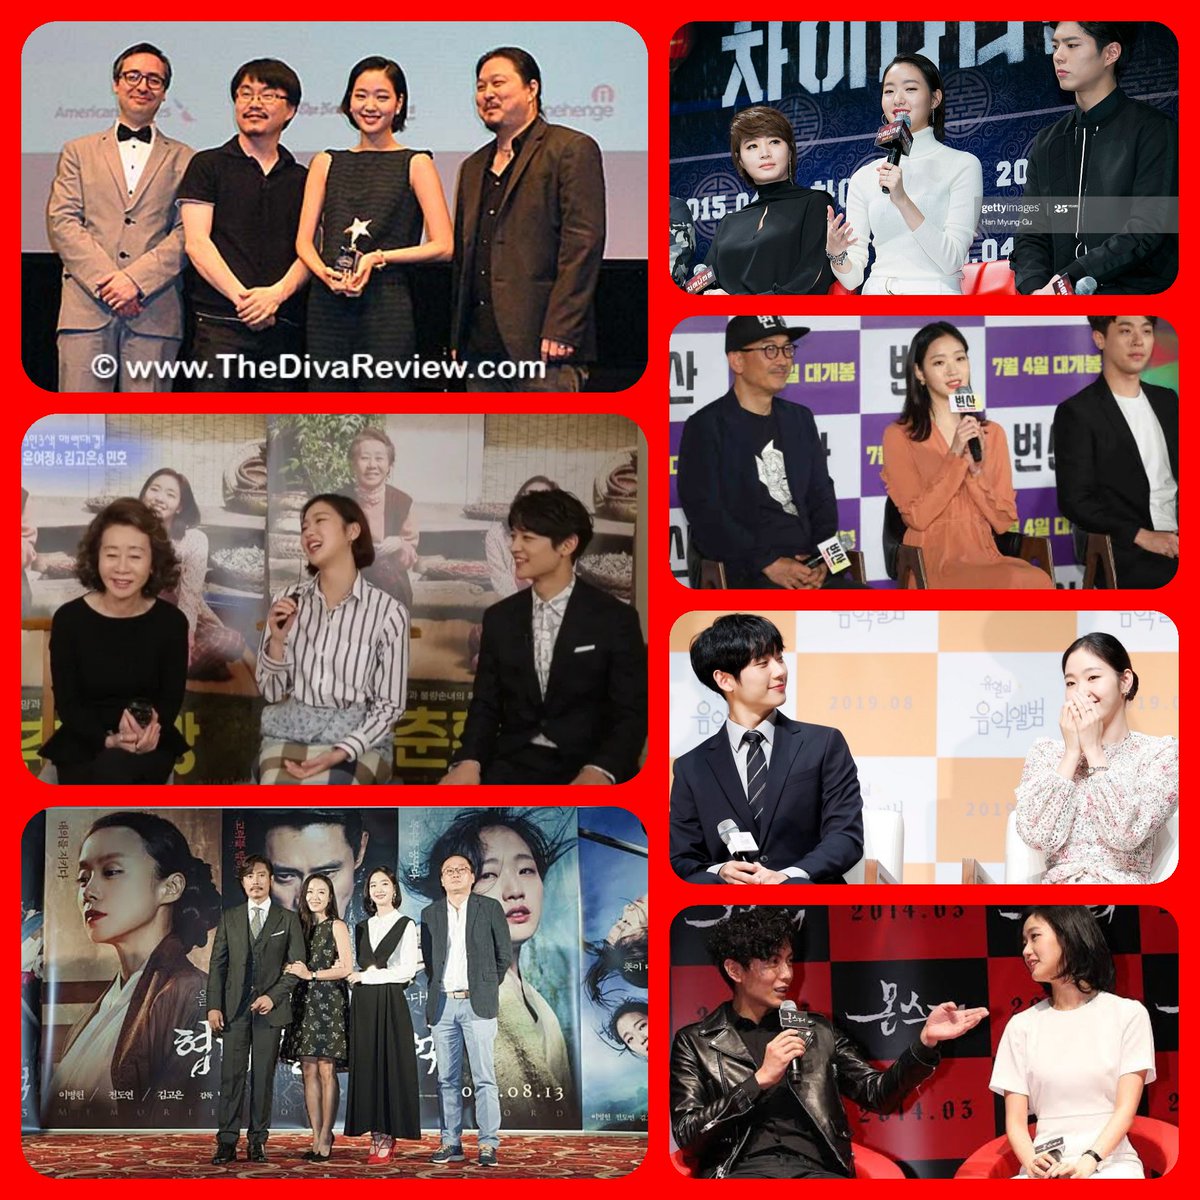 You only need to read/watch interviews of her previous co-stars & prod team to know that  #KimGoEun gained respectability not only for her acting prowess, but also for her professionalism & unassuming persona. Her sunny disposition is refreshing that lightened the mood of the set.